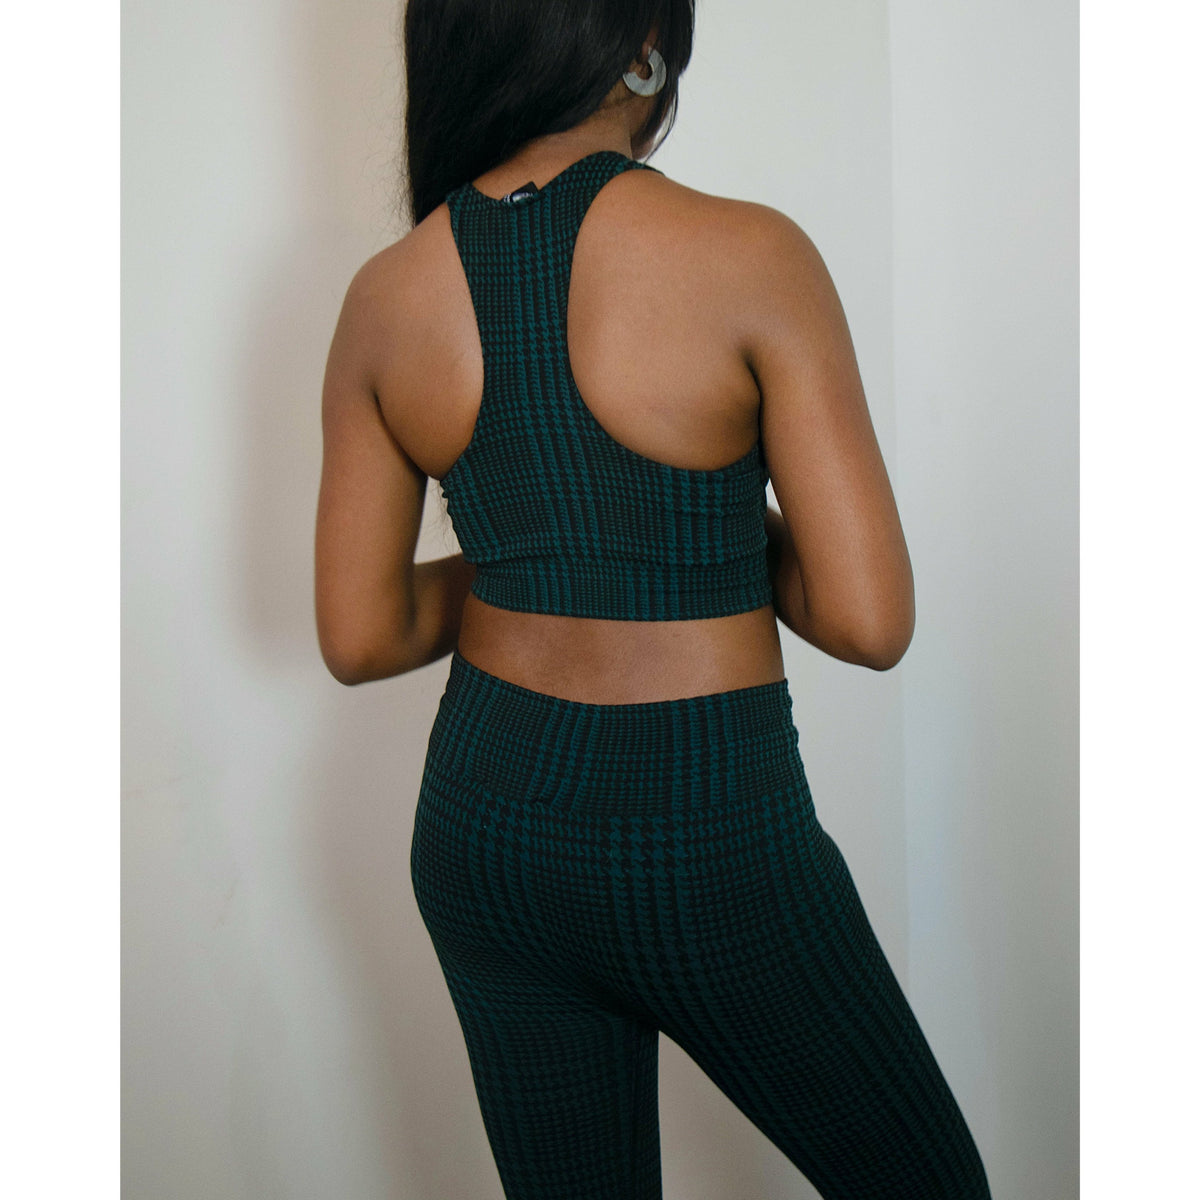 Chelsea Houndstooth Active Pant Suit Hunter Green/Black - Shay B Shop